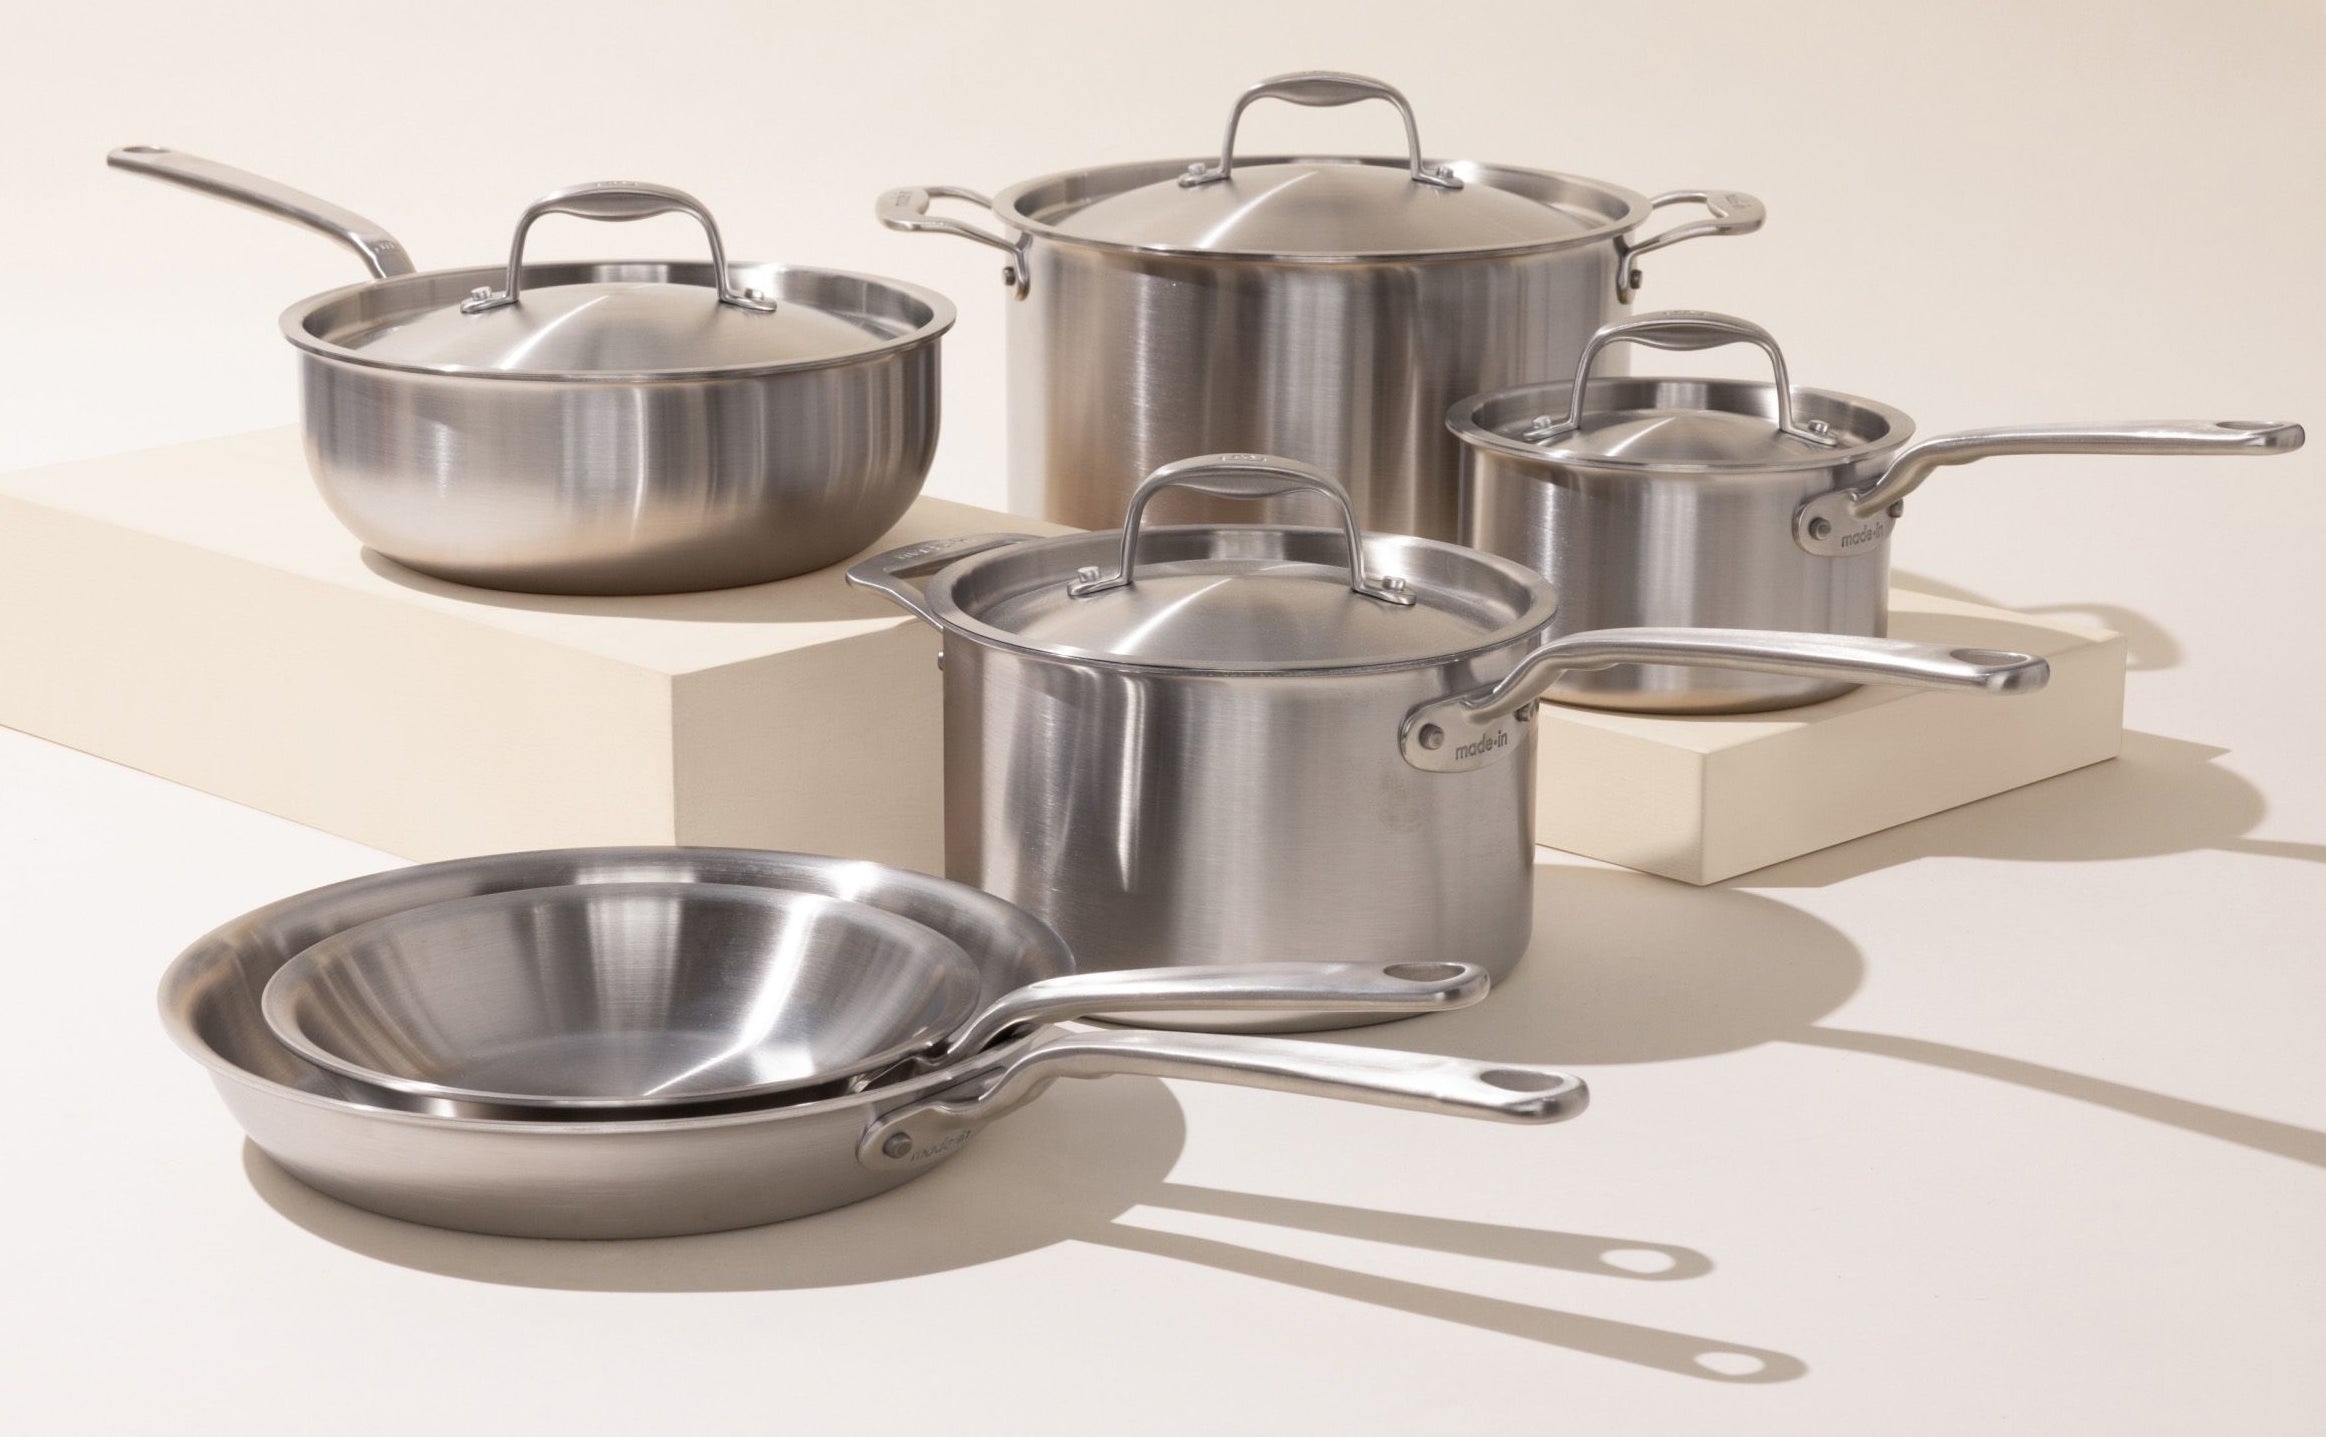 10-piece stainless steel cookware set